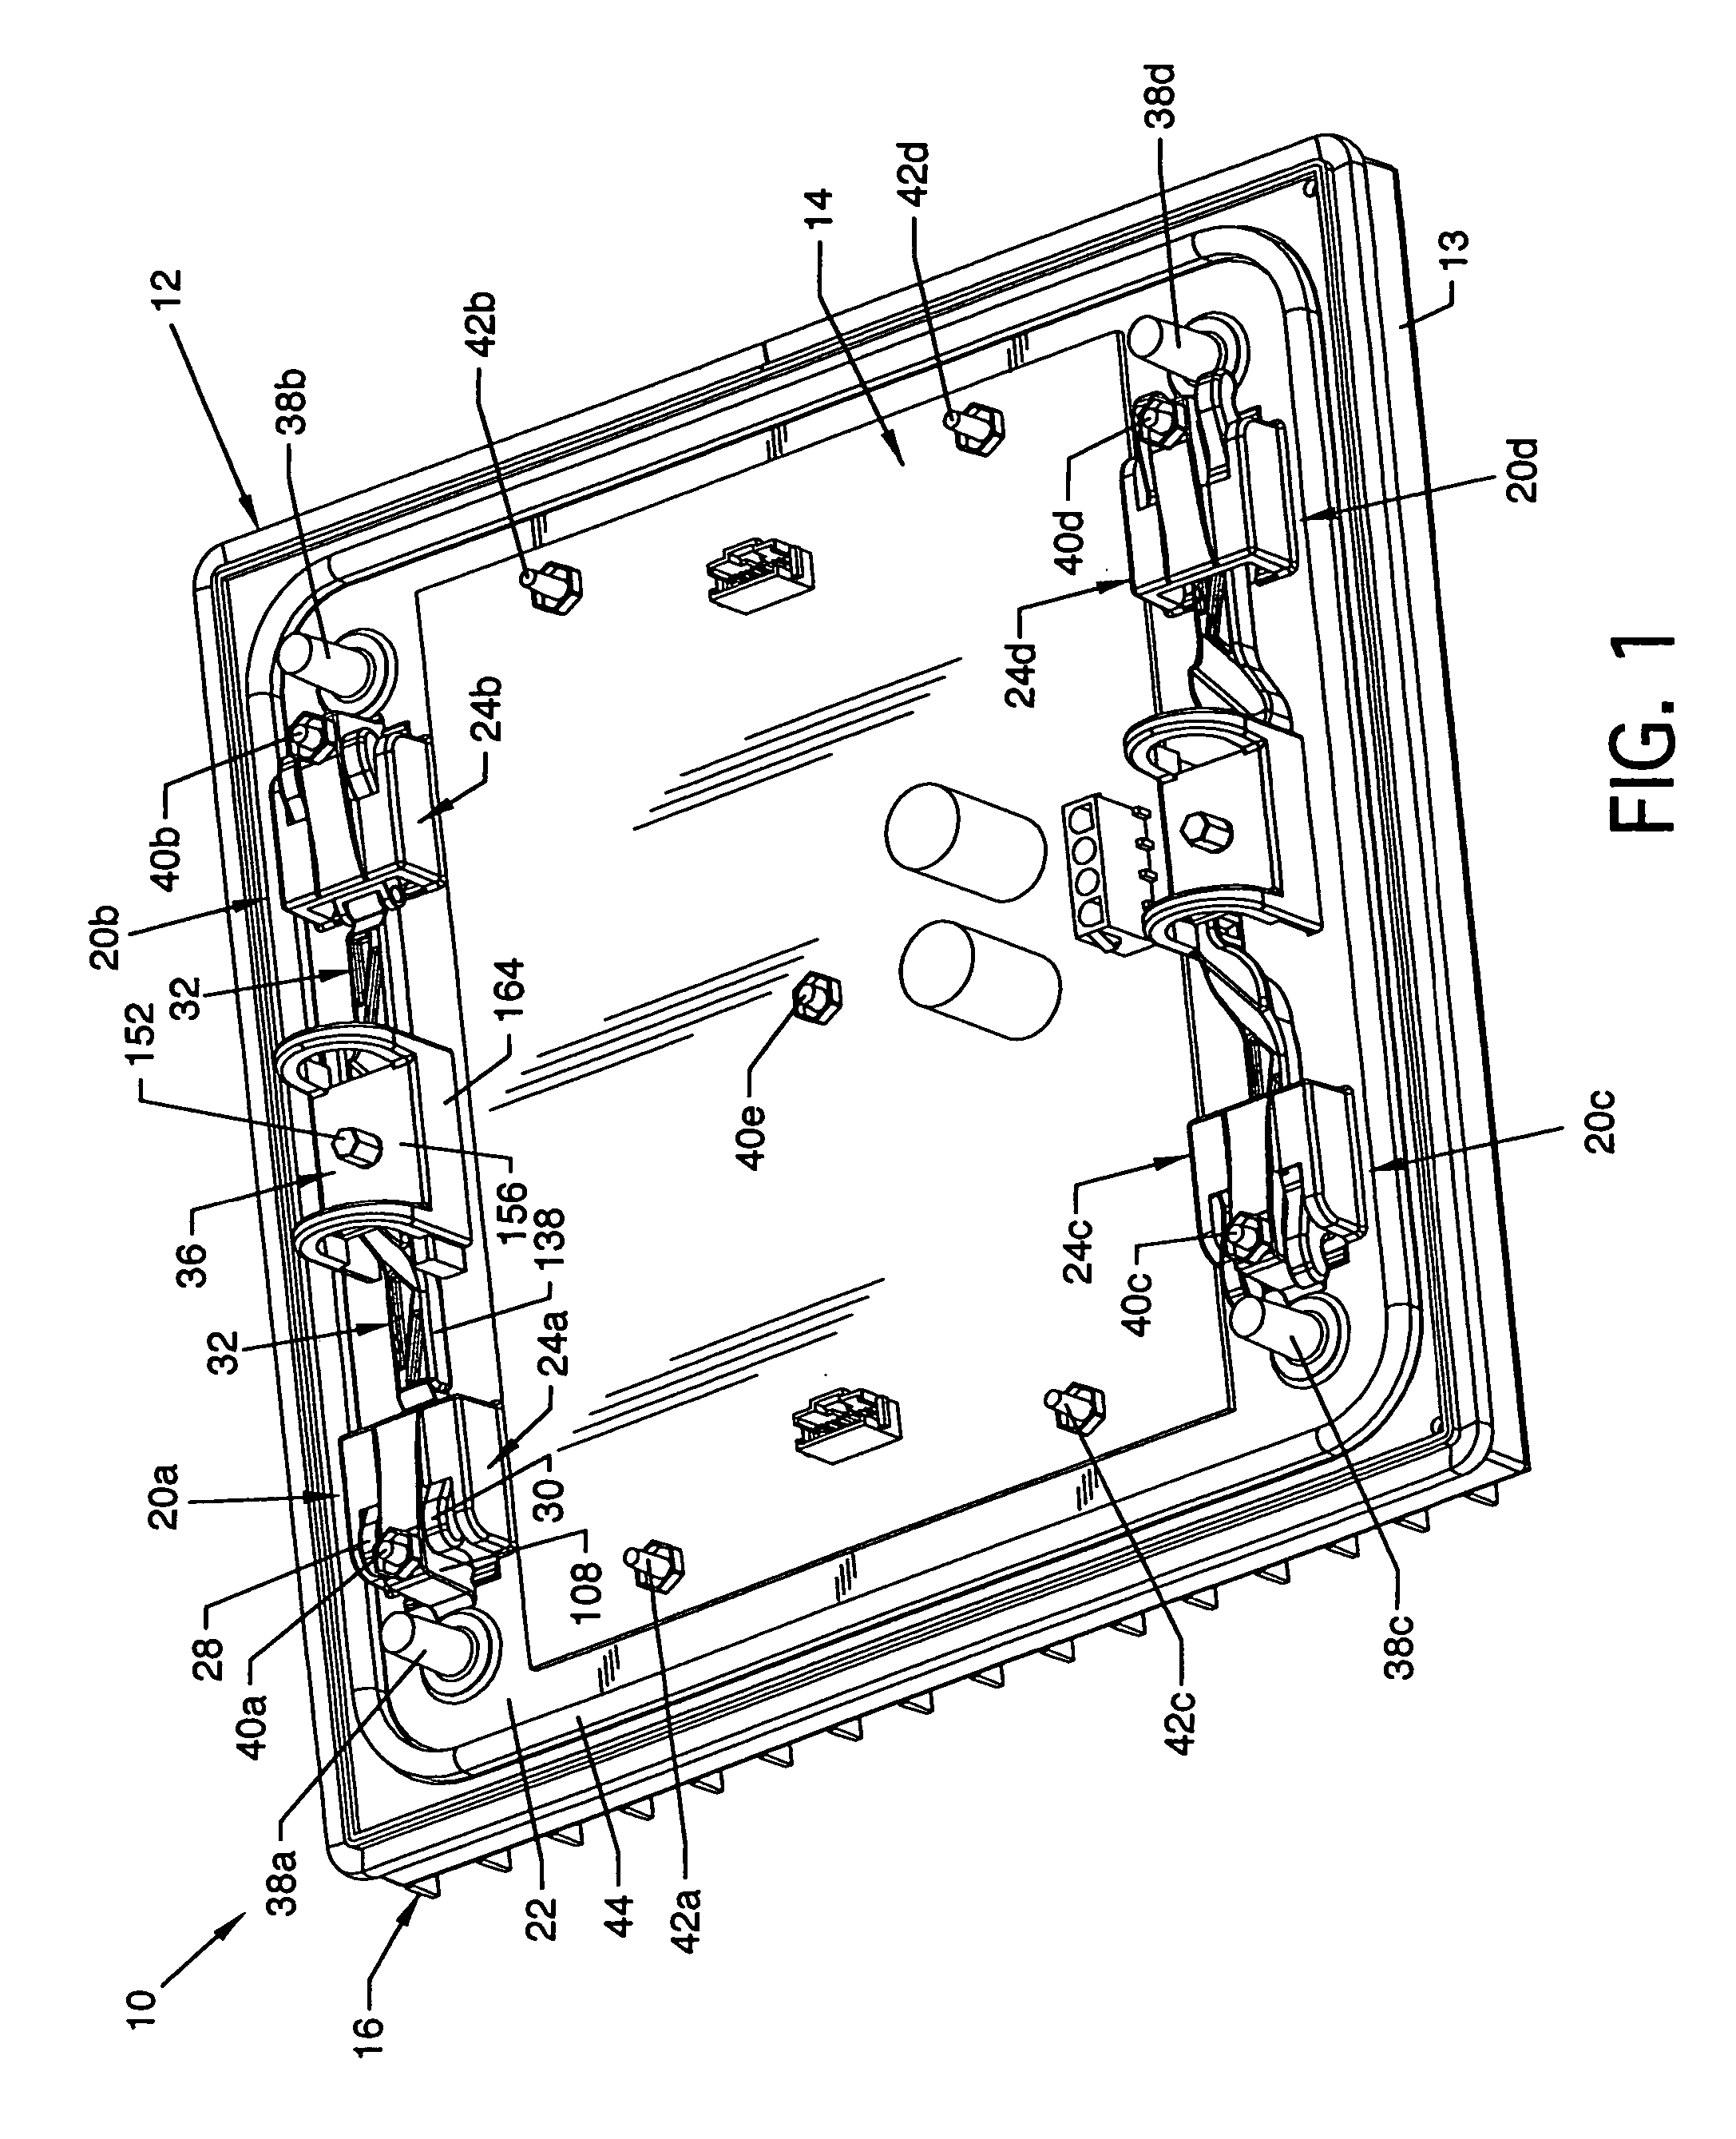 Electronic display module having a four-point latching system for incorporation into an electronic sign and process